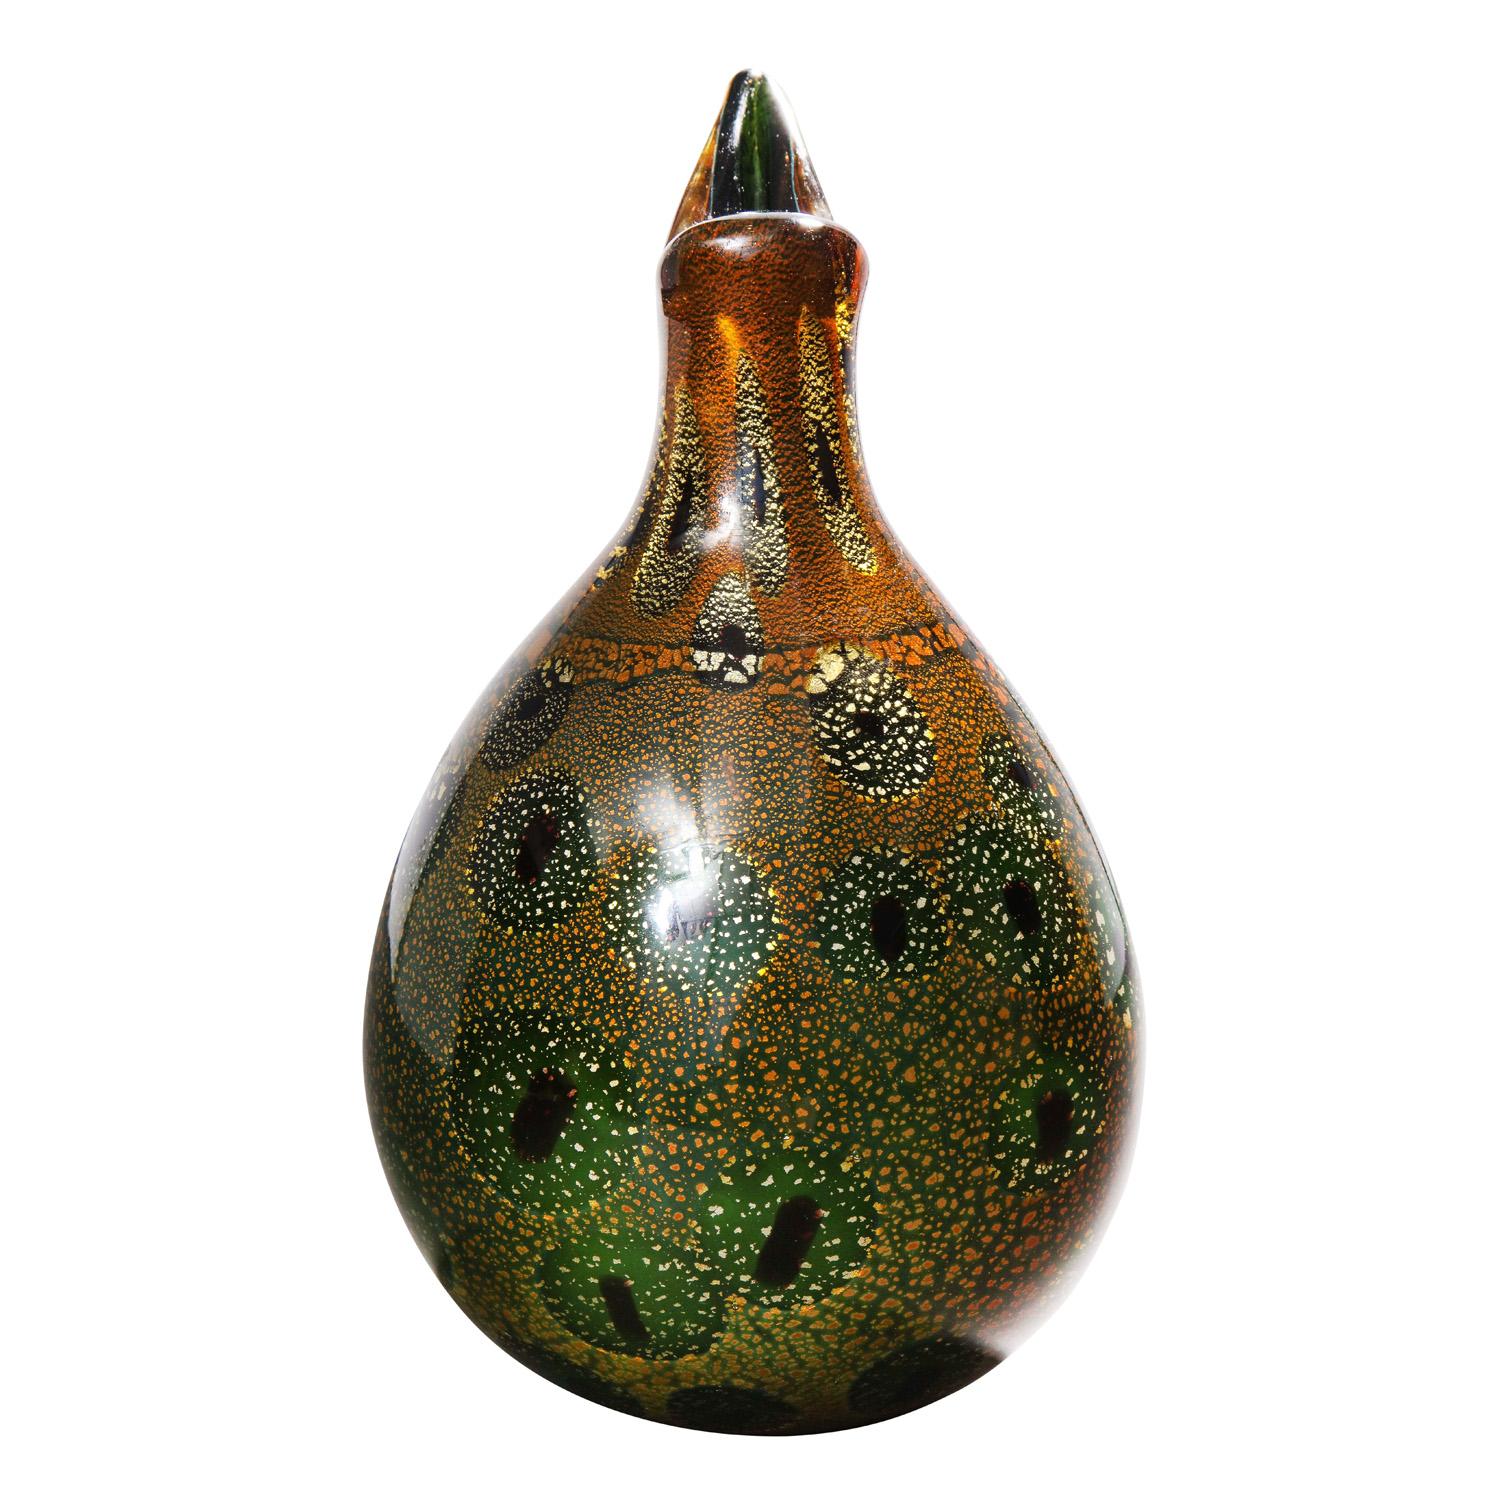 Italian Giulio Radi Hand Blown Glass Vase with Gold Foil and Murrhines, ca 1950 For Sale